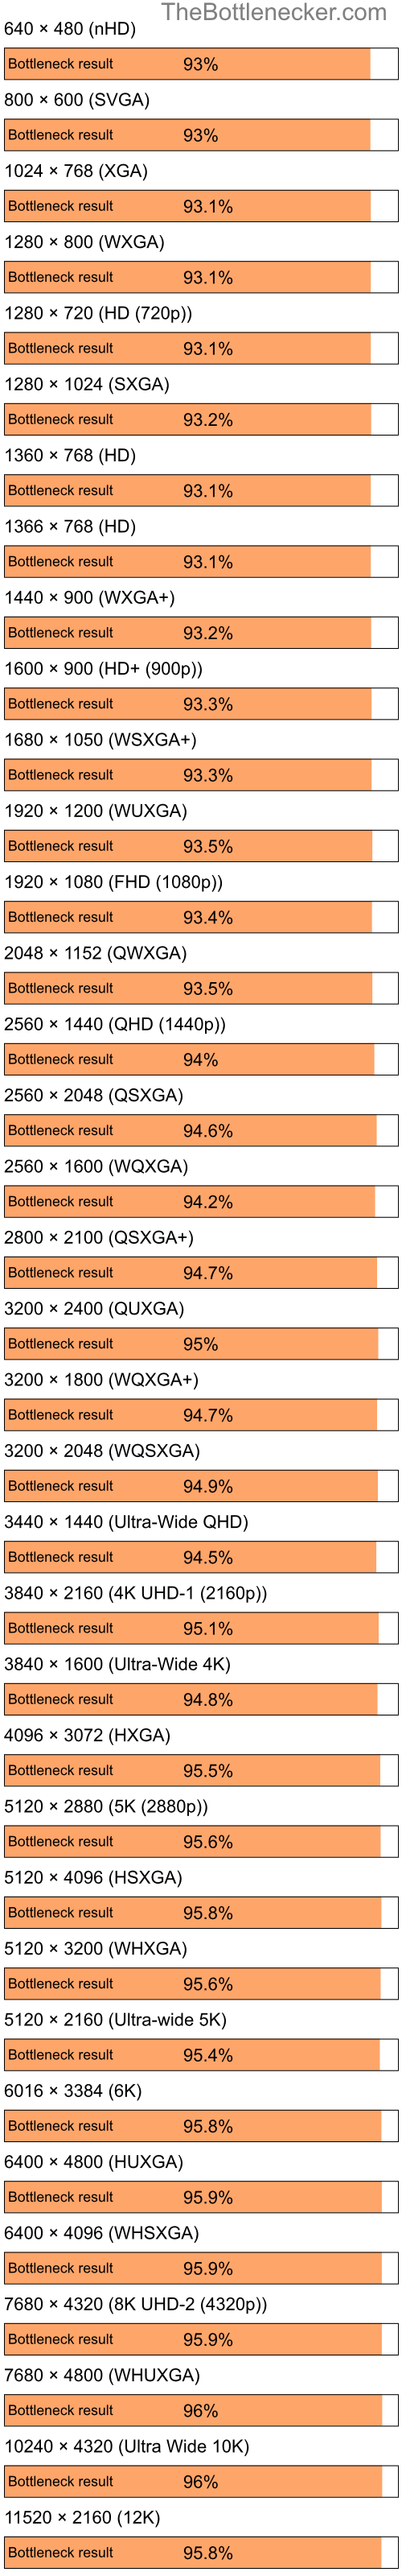 Bottleneck results by resolution for Intel Celeron M 410 and AMD Mobility Radeon 9200 in Graphic Card Intense Tasks